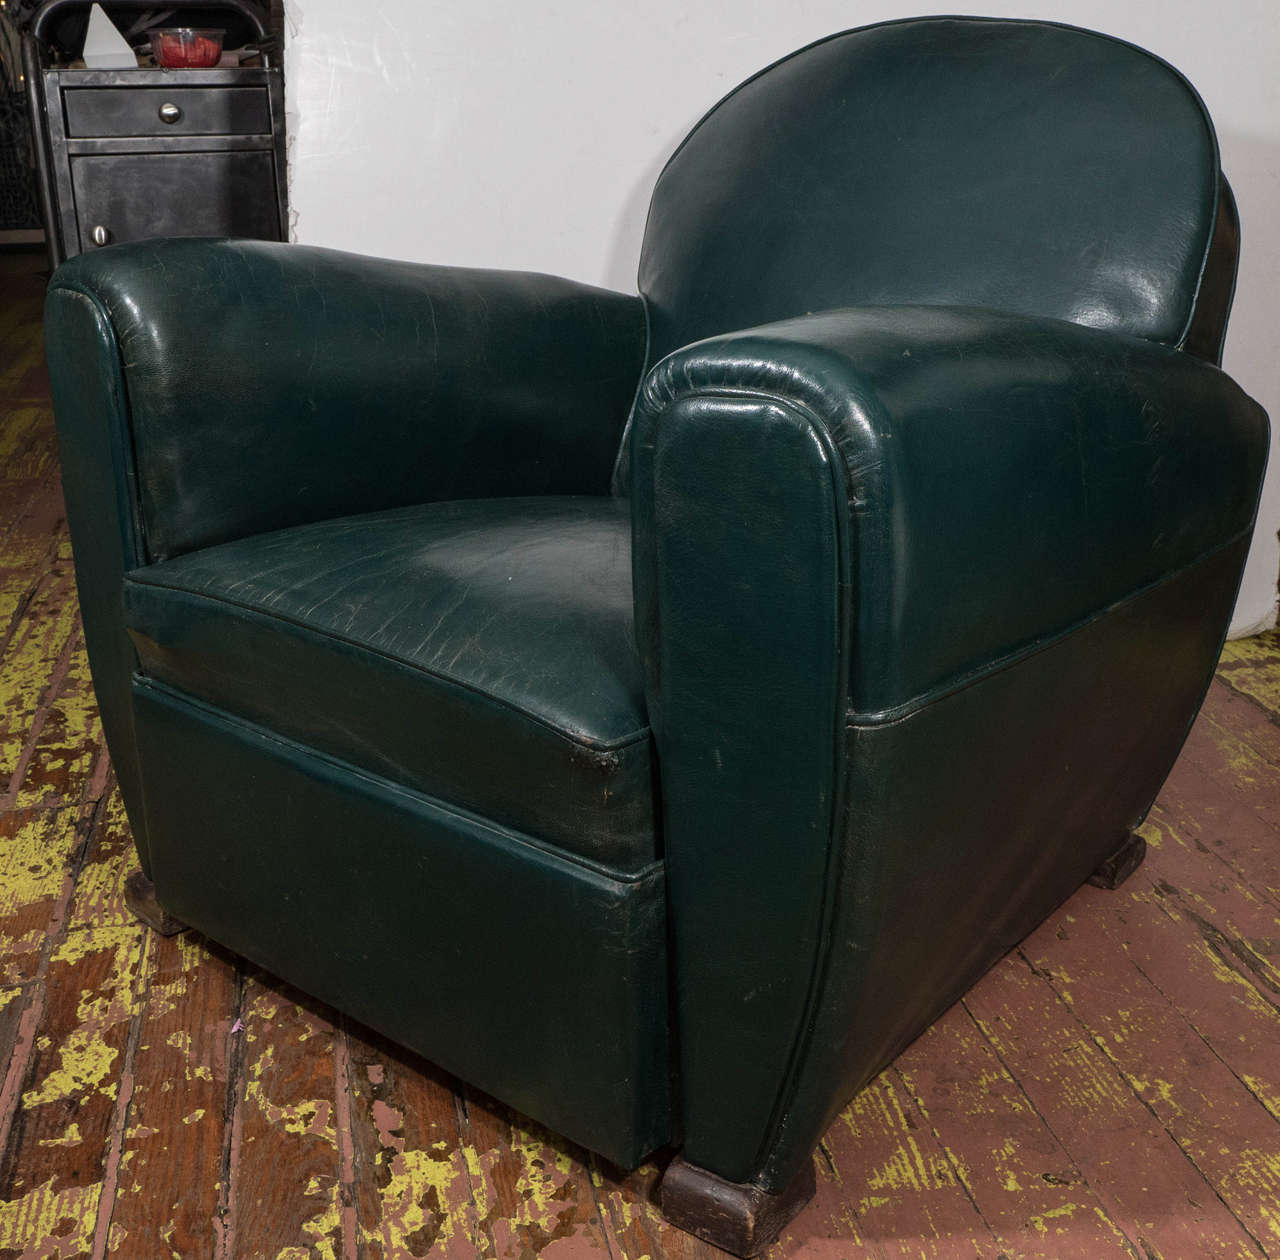 Classic green leather French club chairs from the 1940s.